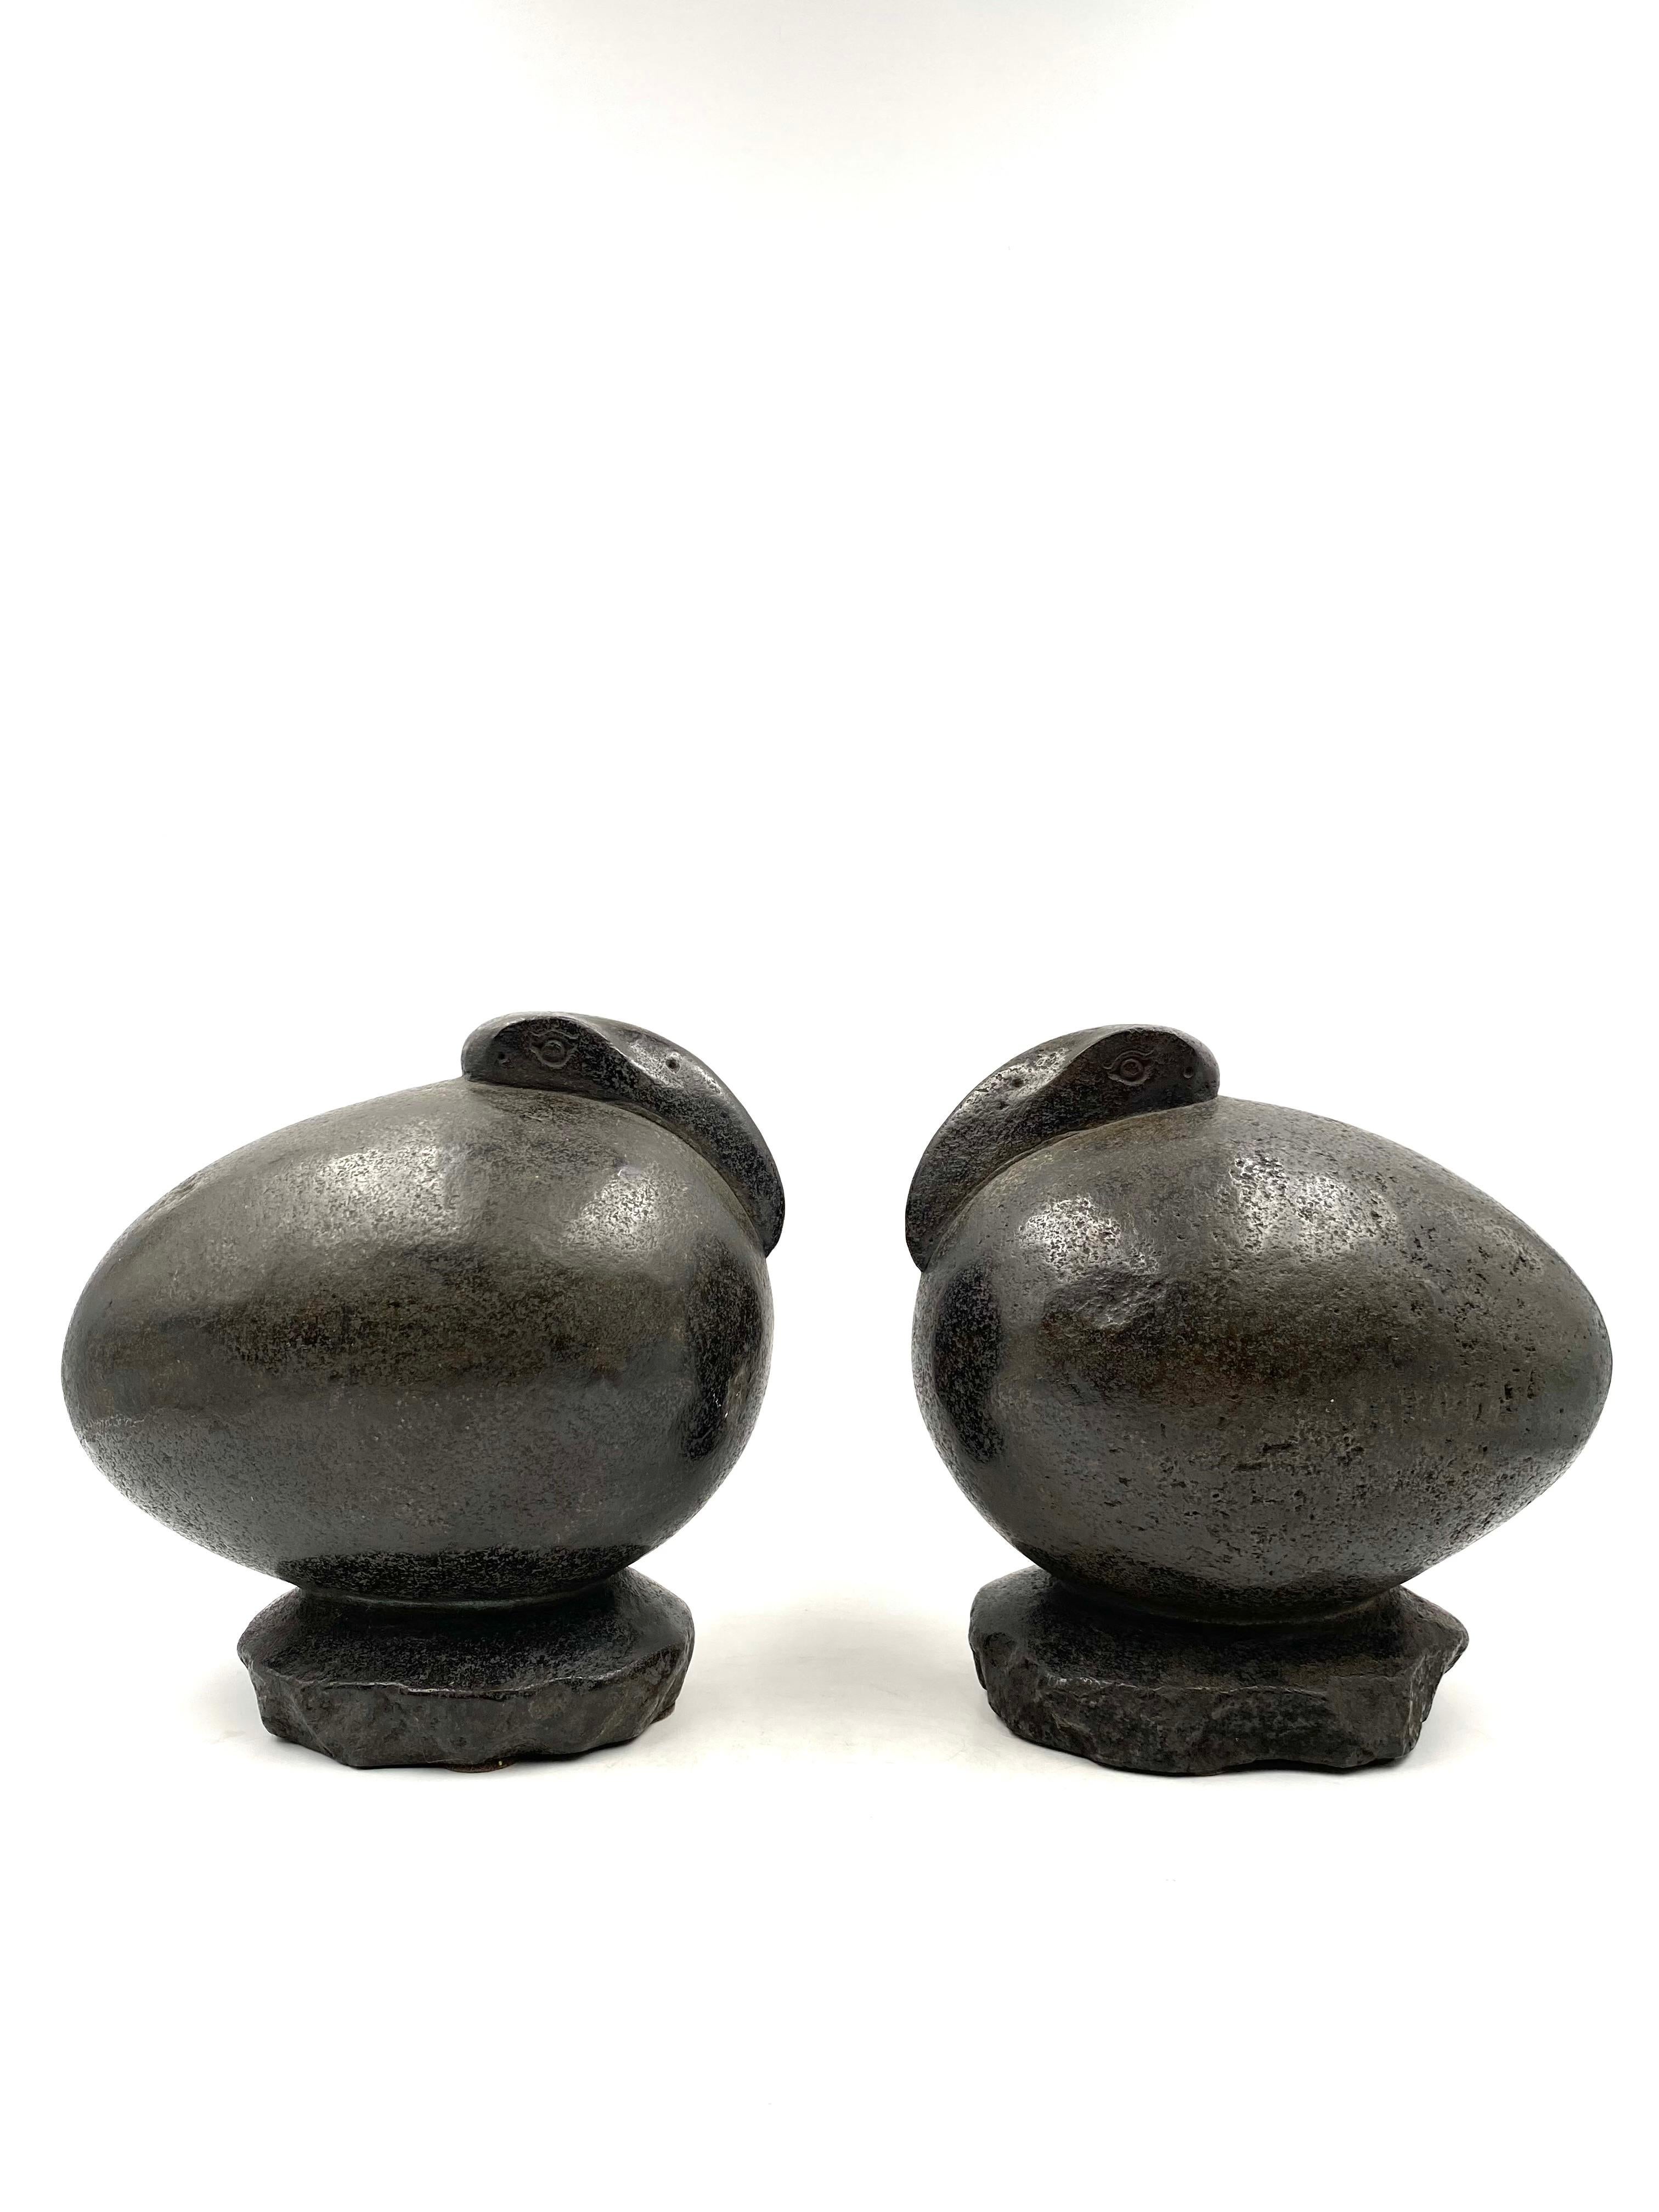 Stone Ibis Birds, Pair of Basalt Ovoid Sculptures, France Early 20th Century